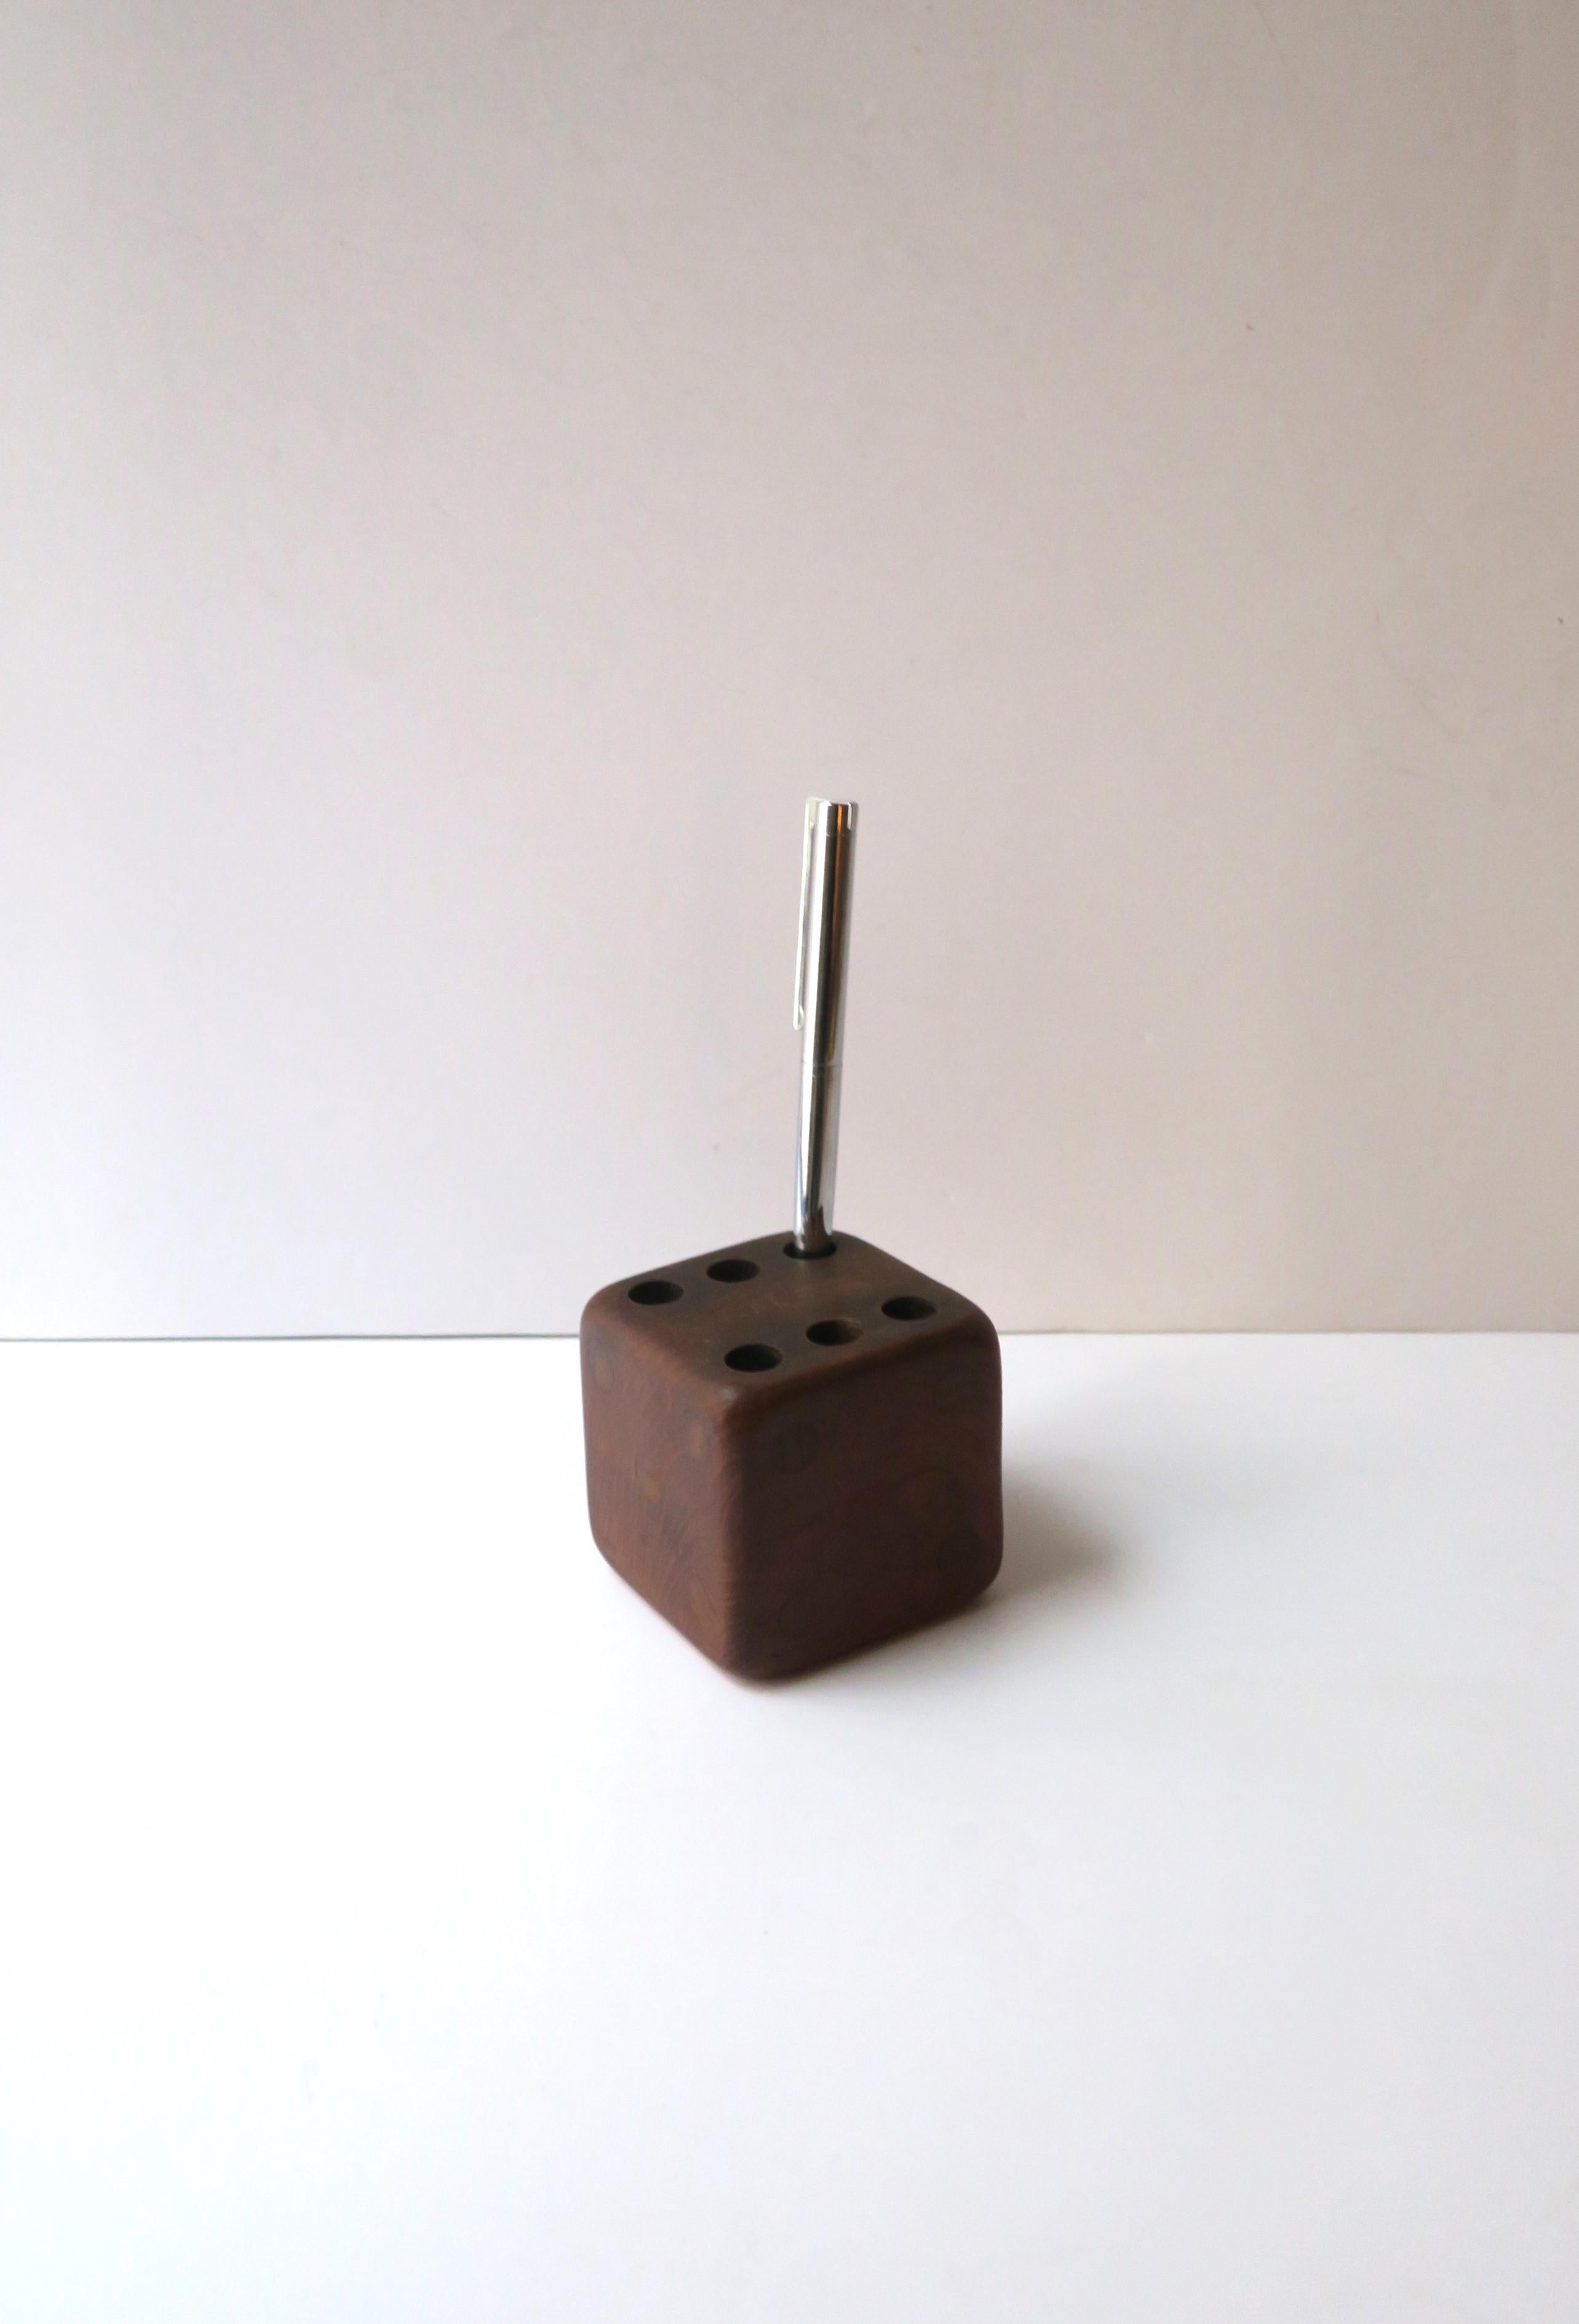 A Swedish wood pen/pencil holder dice/die, Midcentury Modern Scandinavian Modern period, circa mid-20th century, Sweden. A well-designed pen/pencil holder in dice/die form. Marked 'Sweden' as shown in last image. A great piece to contribute to a